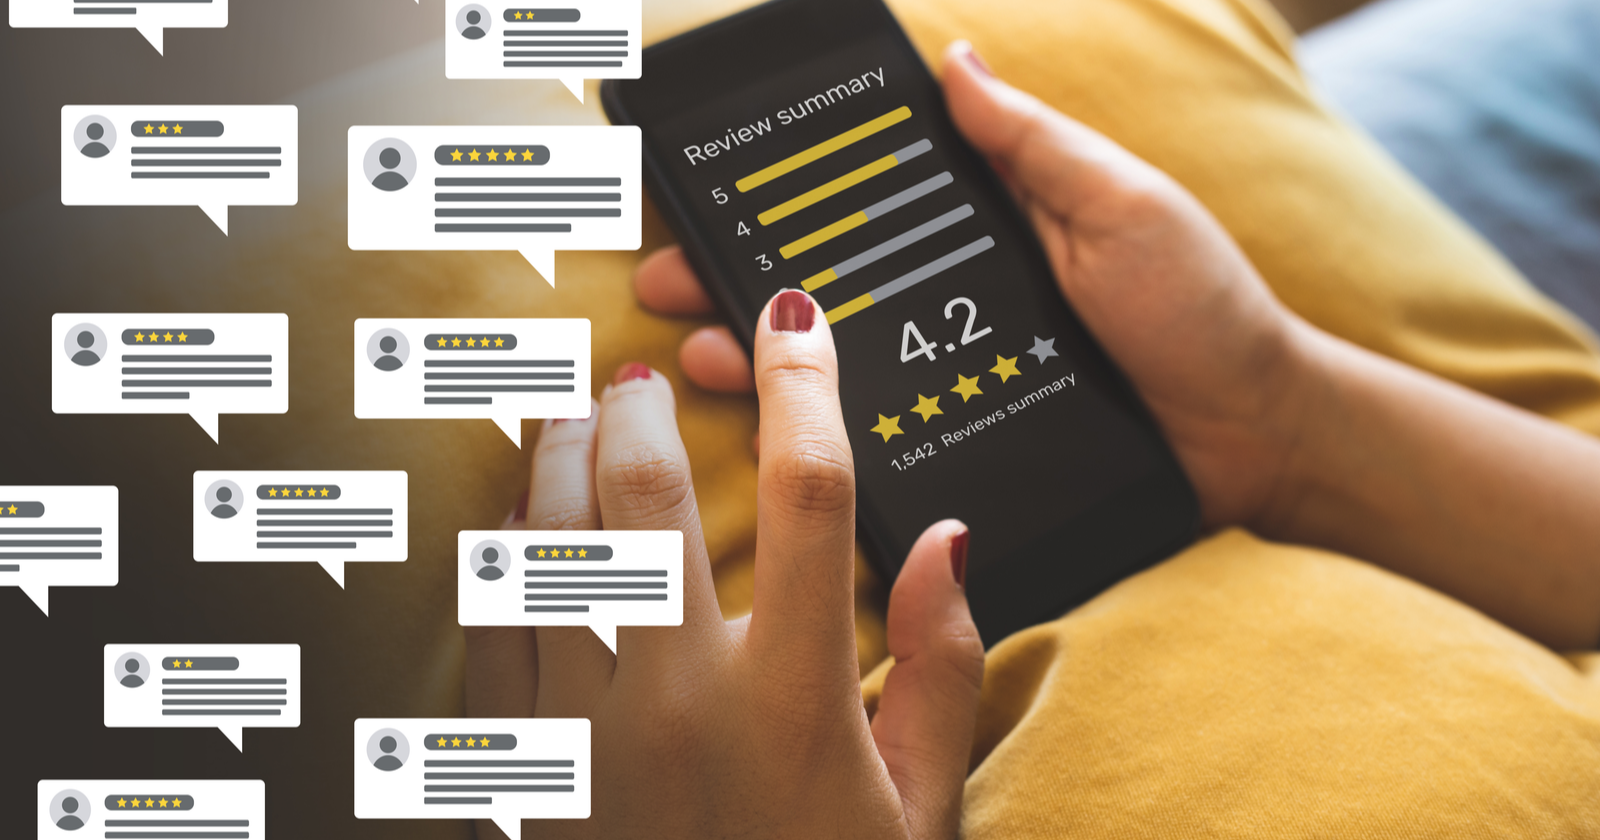 The Complete Guide To Google Business Profile Reviews via @sejournal, @sherrybonelli